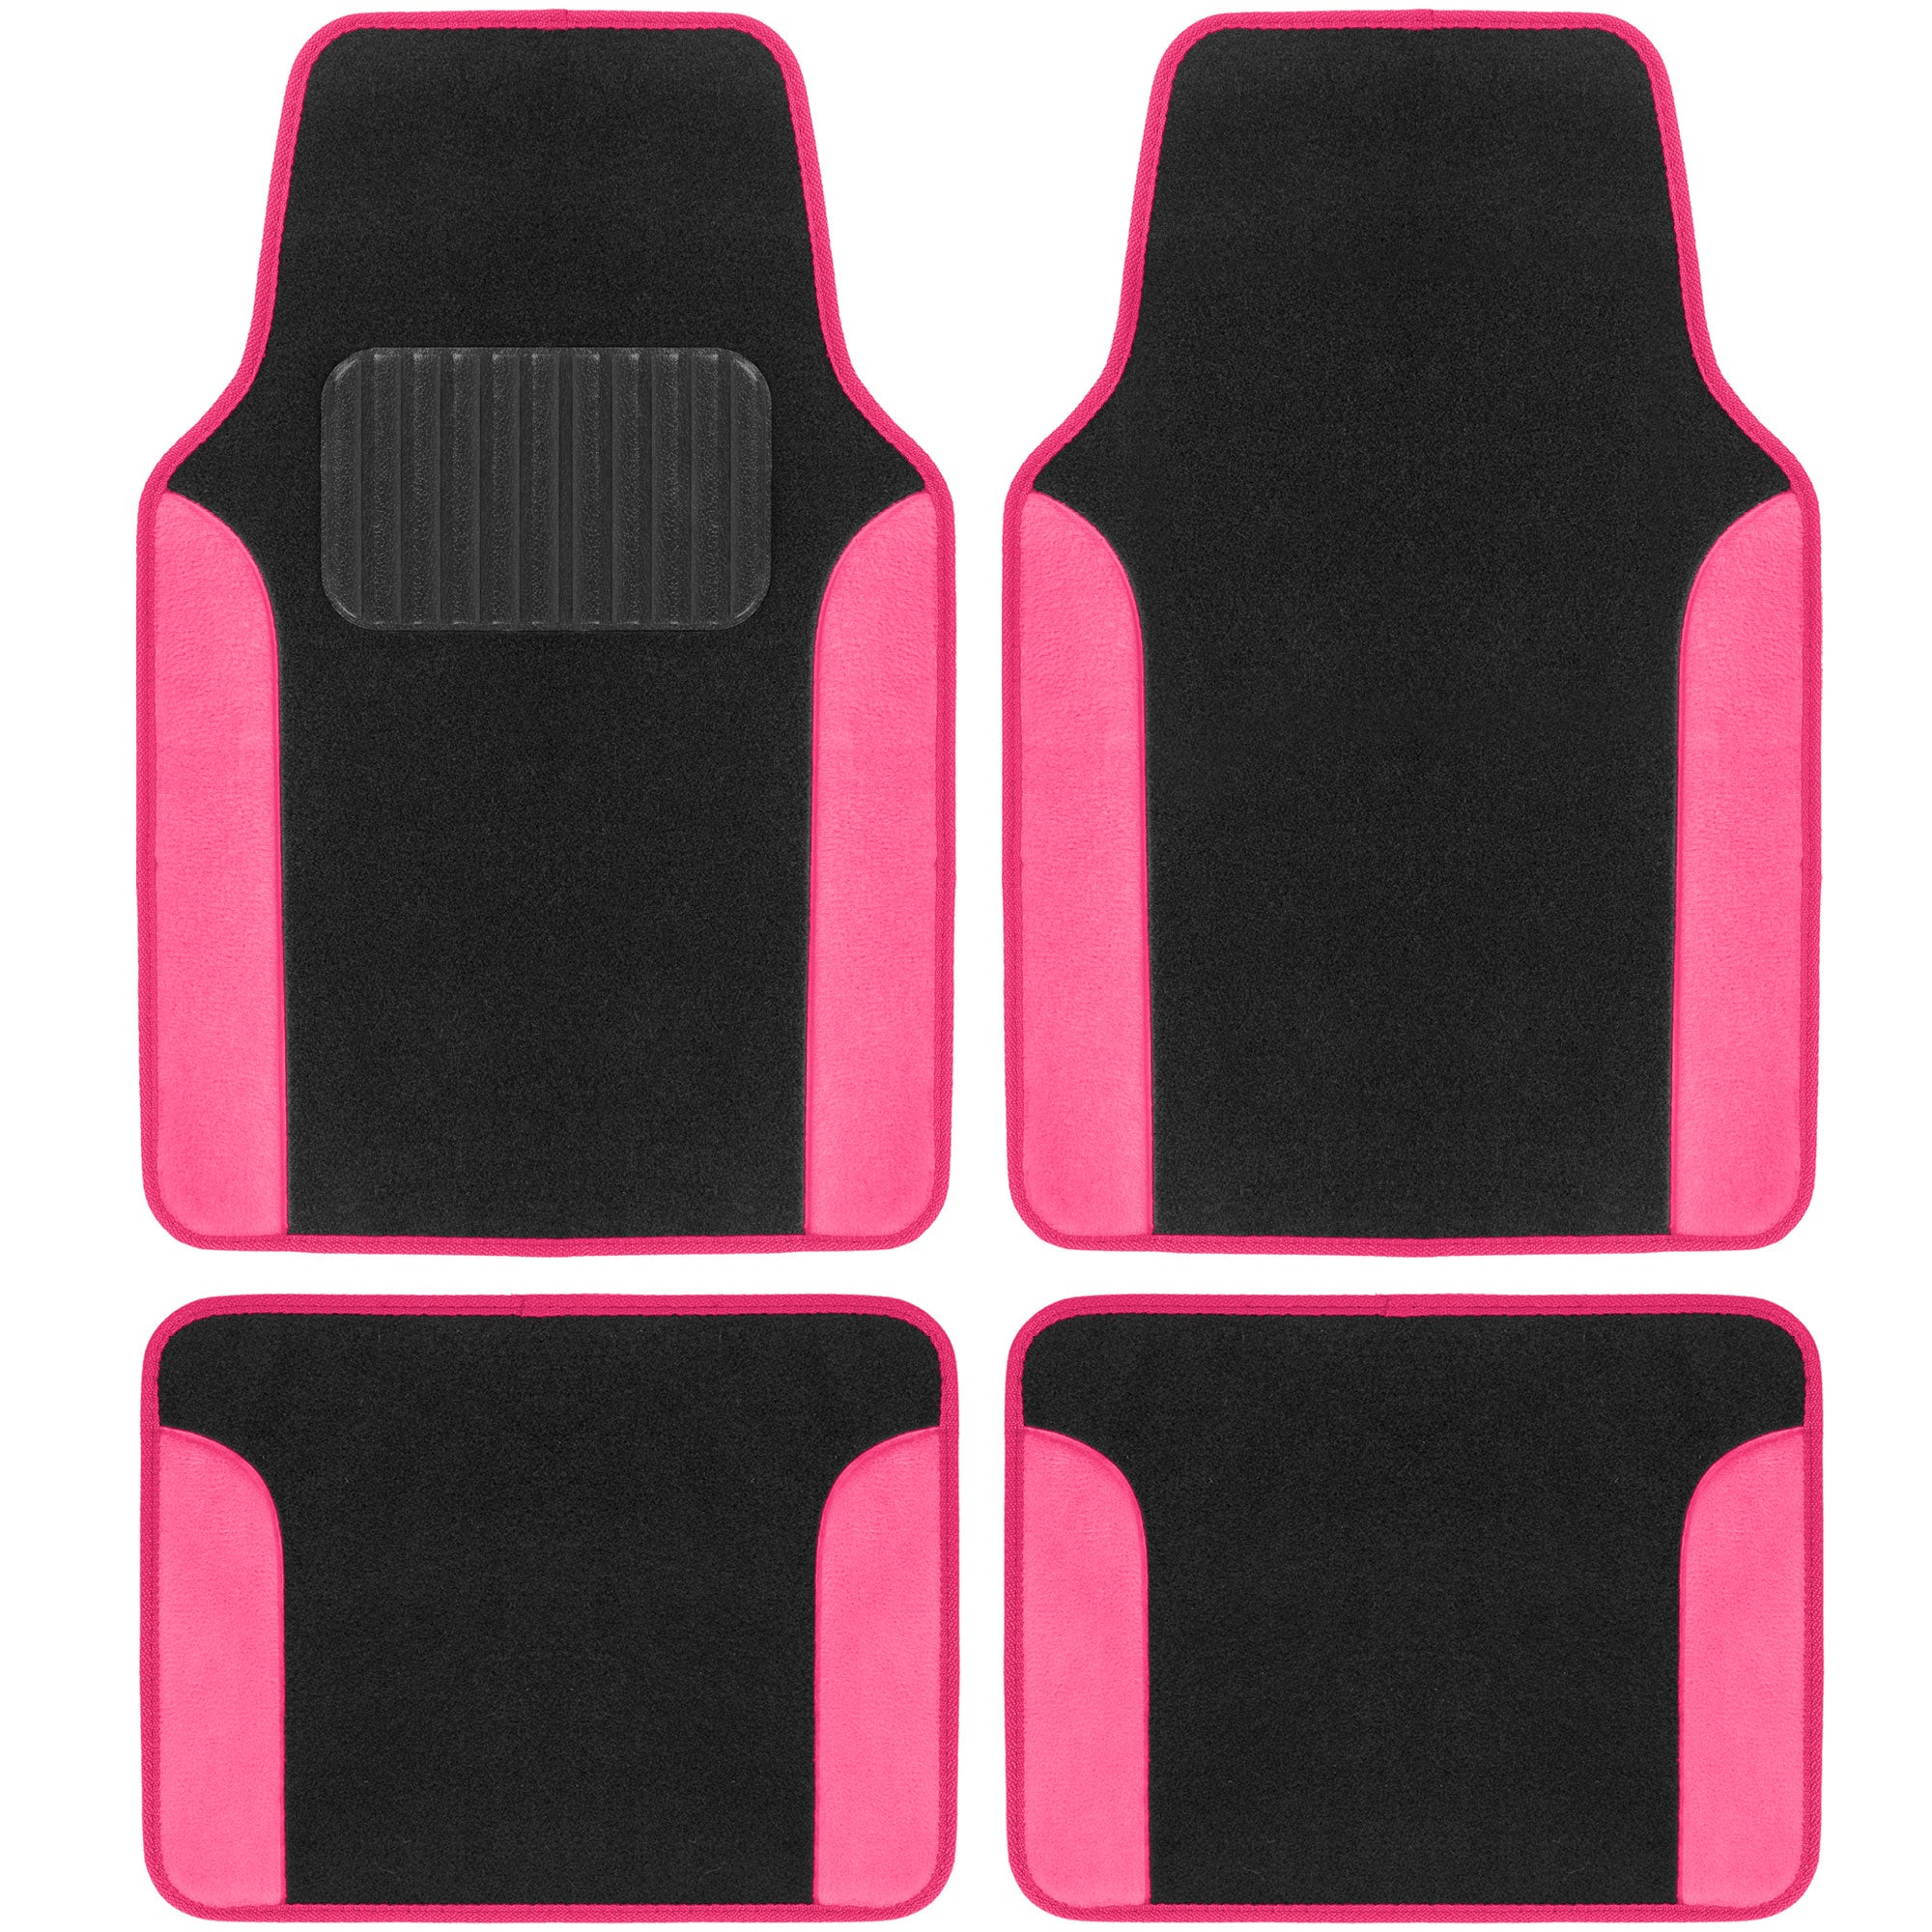 BDK Hot Pink Carpet Car Floor Mats - Two-Tone Faux Leather Automotive Floor Mats, Included Anti-Slip Features and Built-in Heel Pad, Stylish Floor Mats for Cars Truck Van SUV